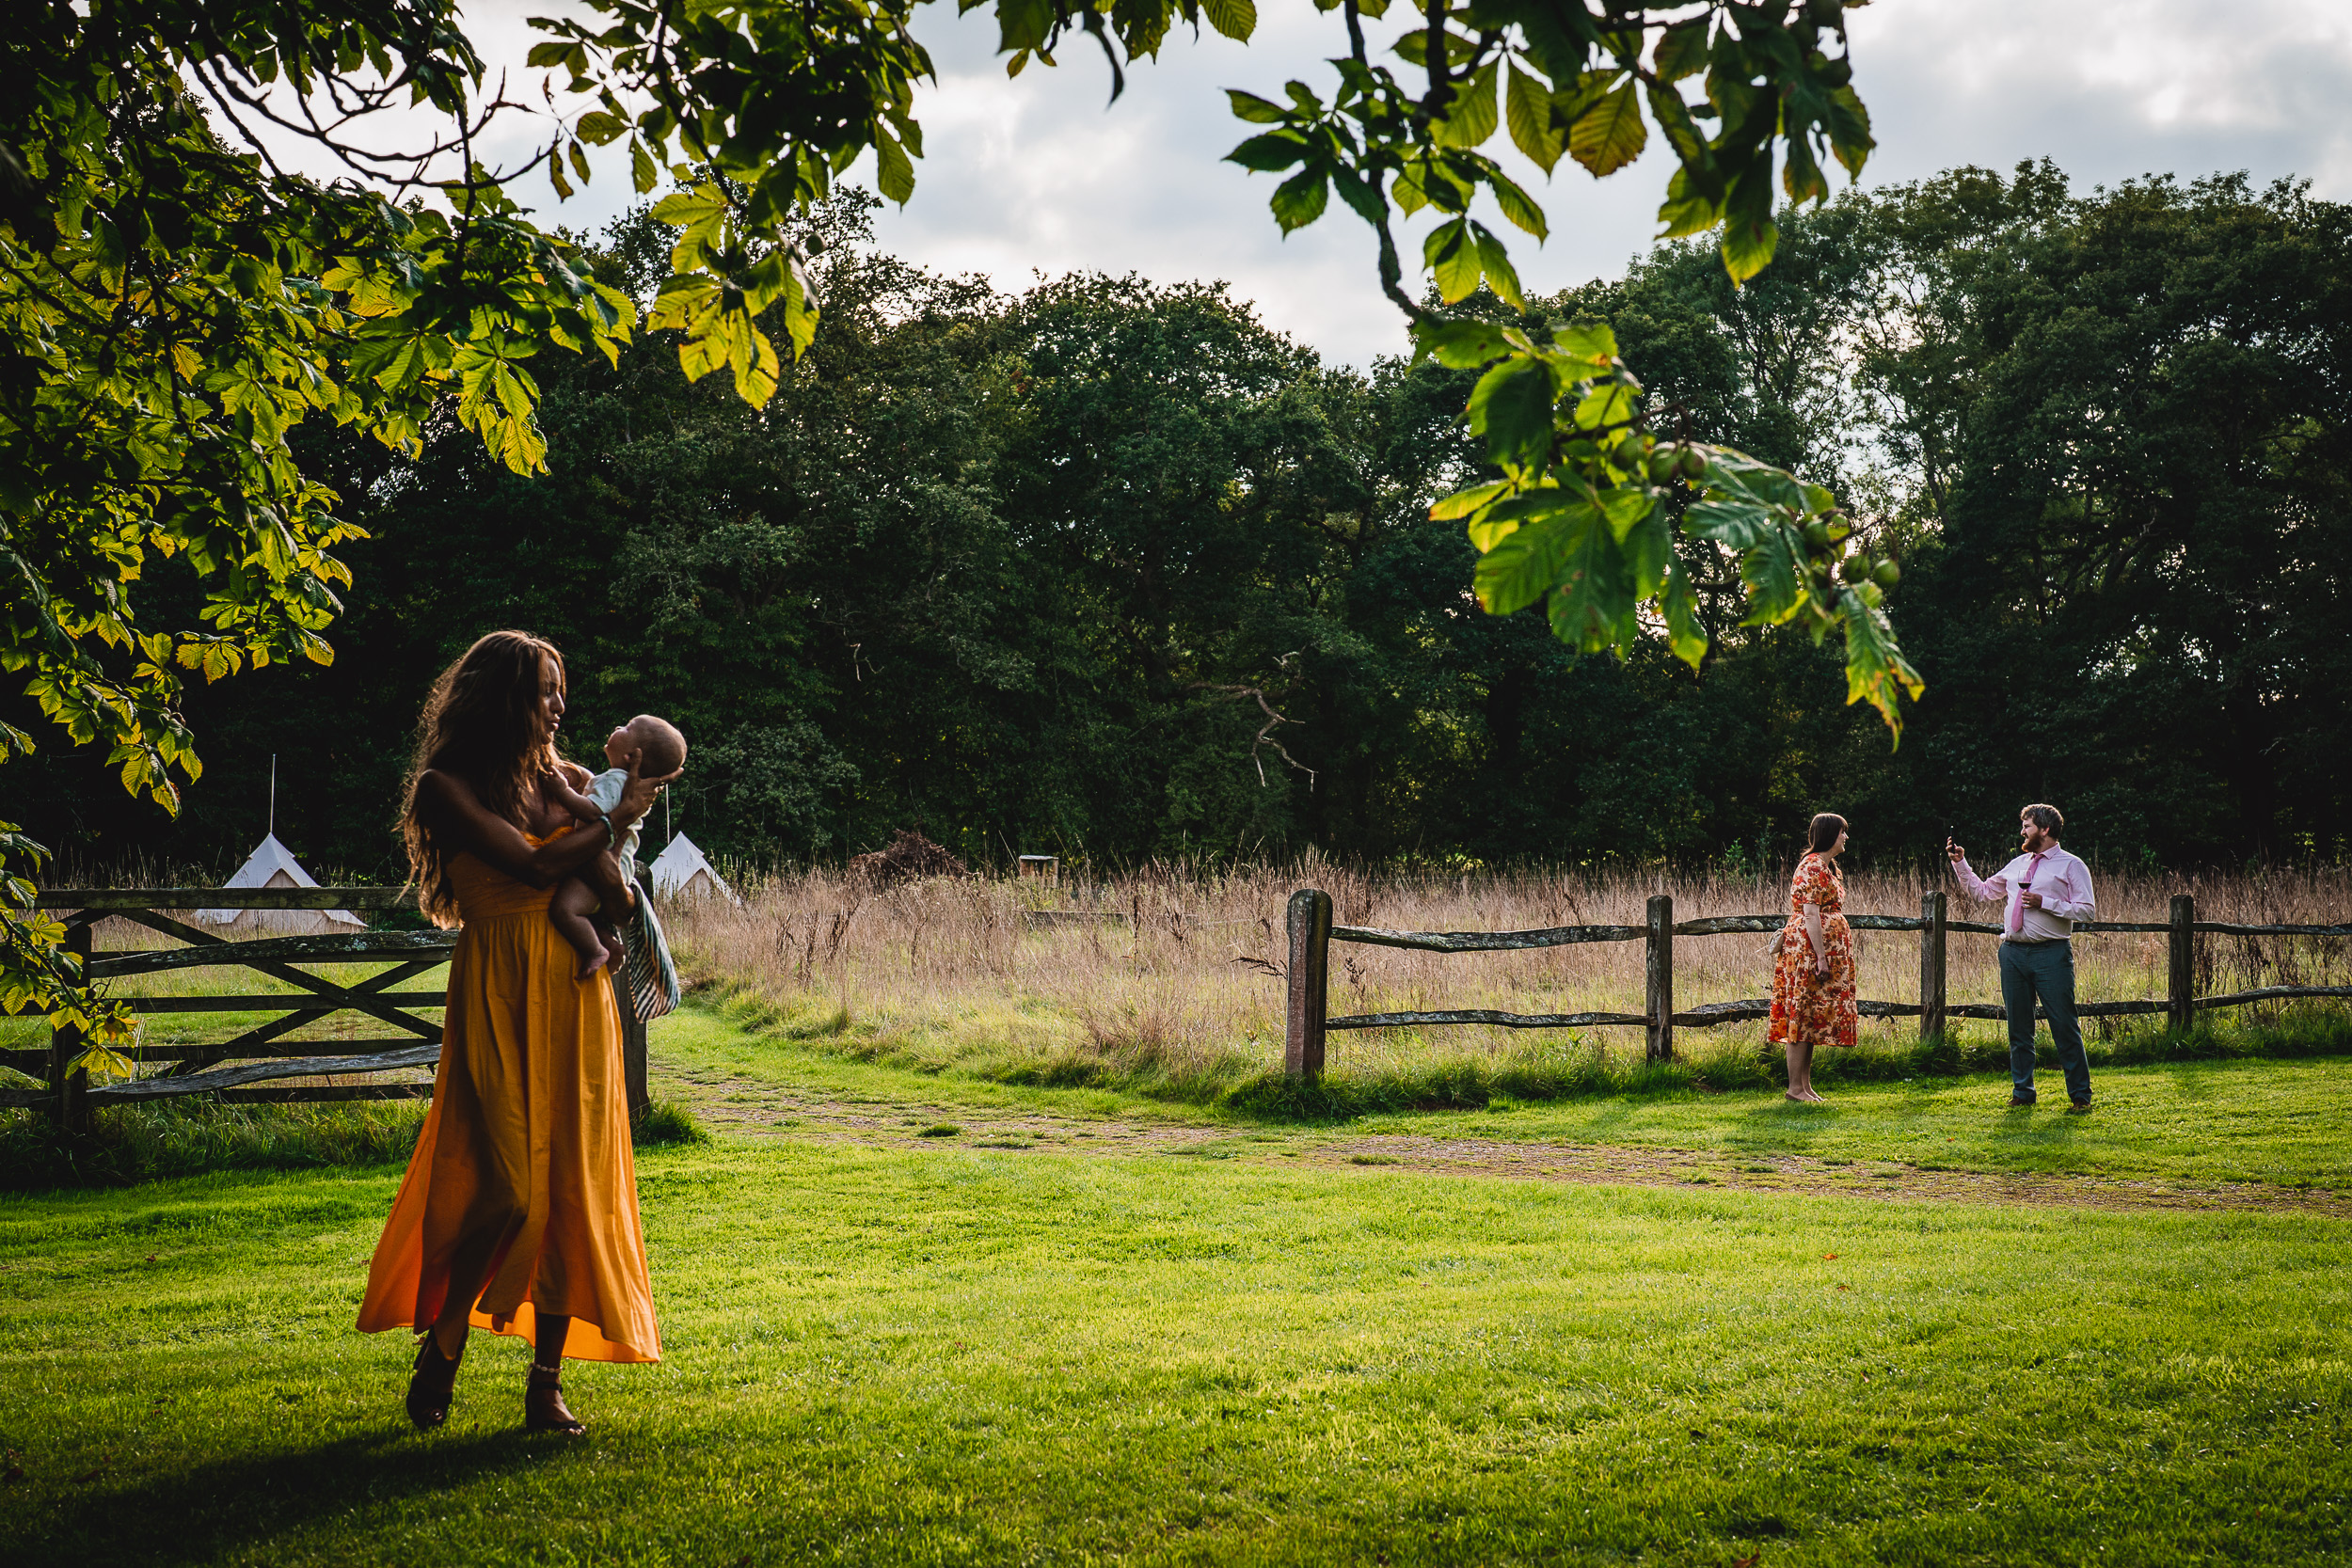 A woman in a yellow dress and a baby in a grassy field at Ridge Farm.